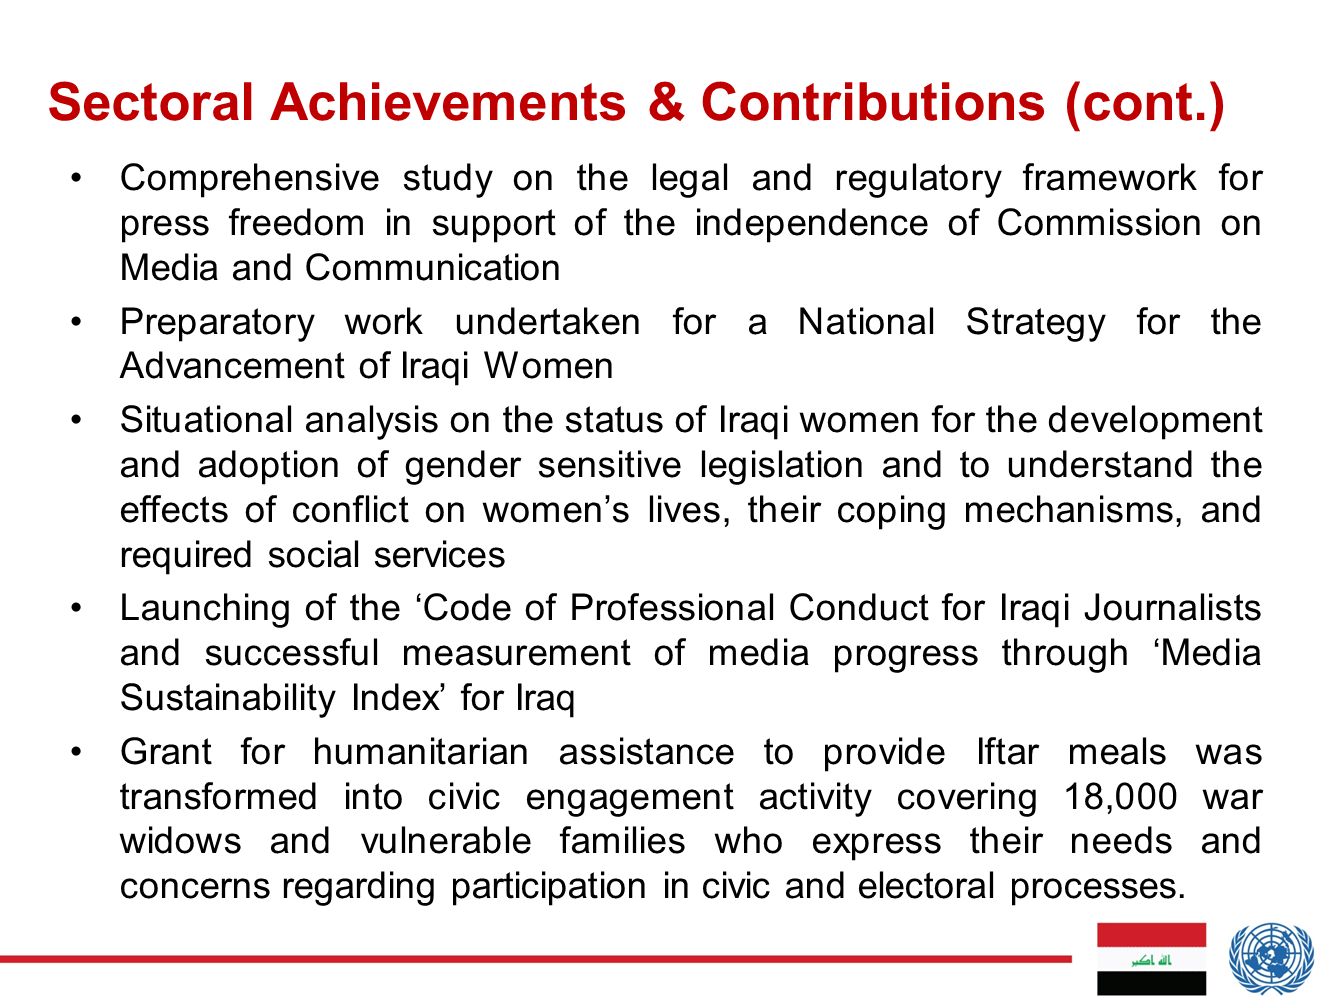 Comprehensive study on the legal and regulatory framework for press freedom in support of the independence of Commission on Media and Communication Preparatory work undertaken for a National Strategy for the Advancement of Iraqi Women Situational analysis on the status of Iraqi women for the development and adoption of gender sensitive legislation and to understand the effects of conflict on women’s lives, their coping mechanisms, and required social services Launching of the ‘Code of Professional Conduct for Iraqi Journalists and successful measurement of media progress through ‘Media Sustainability Index’ for Iraq Grant for humanitarian assistance to provide Iftar meals was transformed into civic engagement activity covering 18,000 war widows and vulnerable families who express their needs and concerns regarding participation in civic and electoral processes.